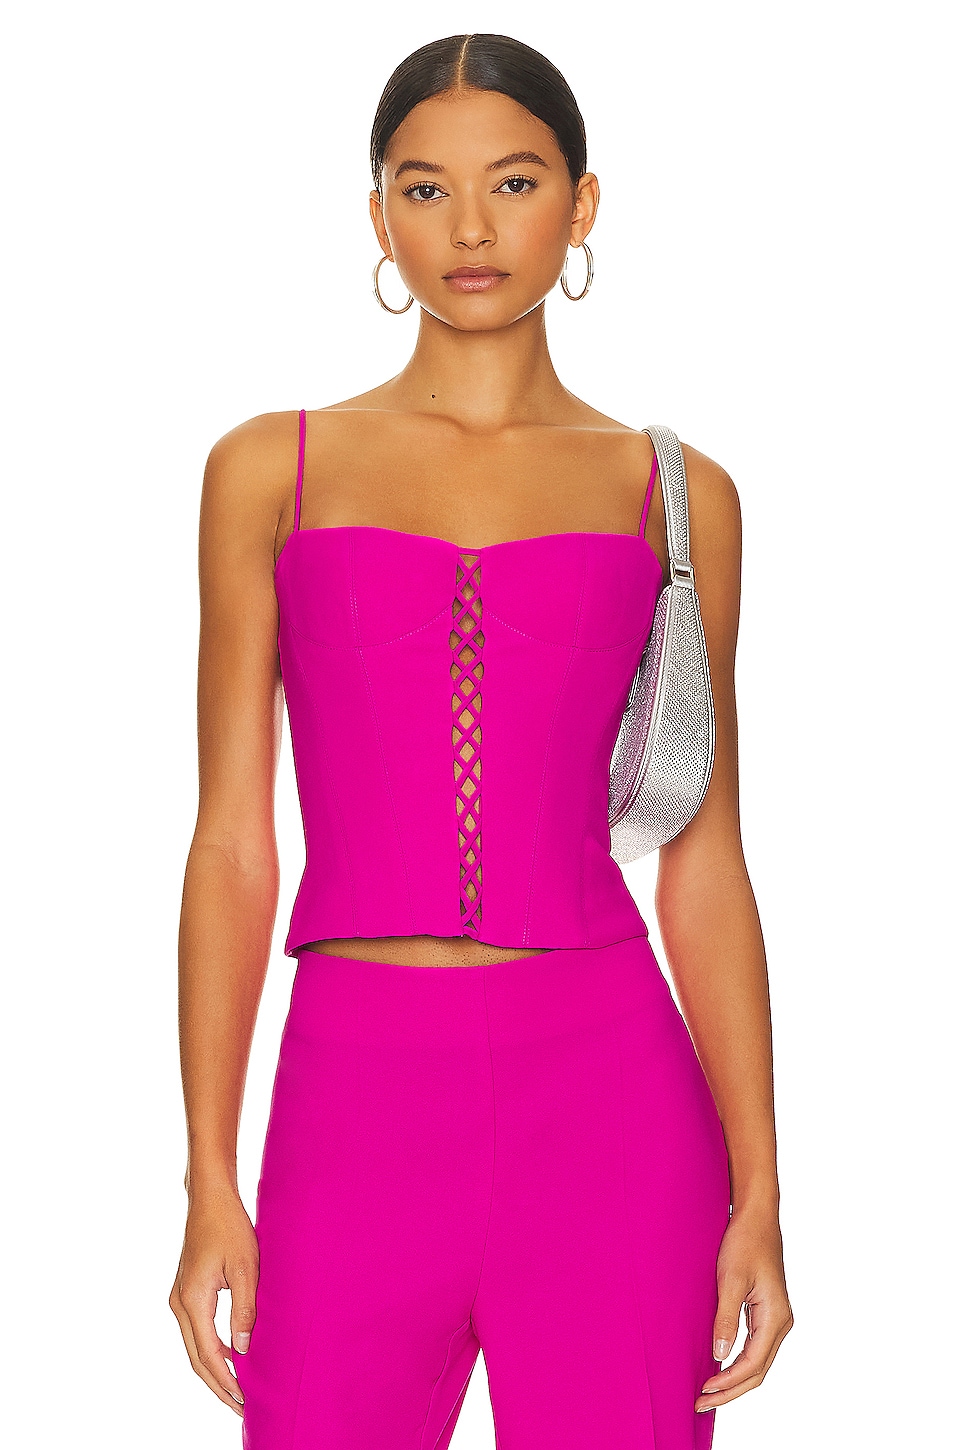 Rozie Corsets Lace Up Corset Top in Fuchsia